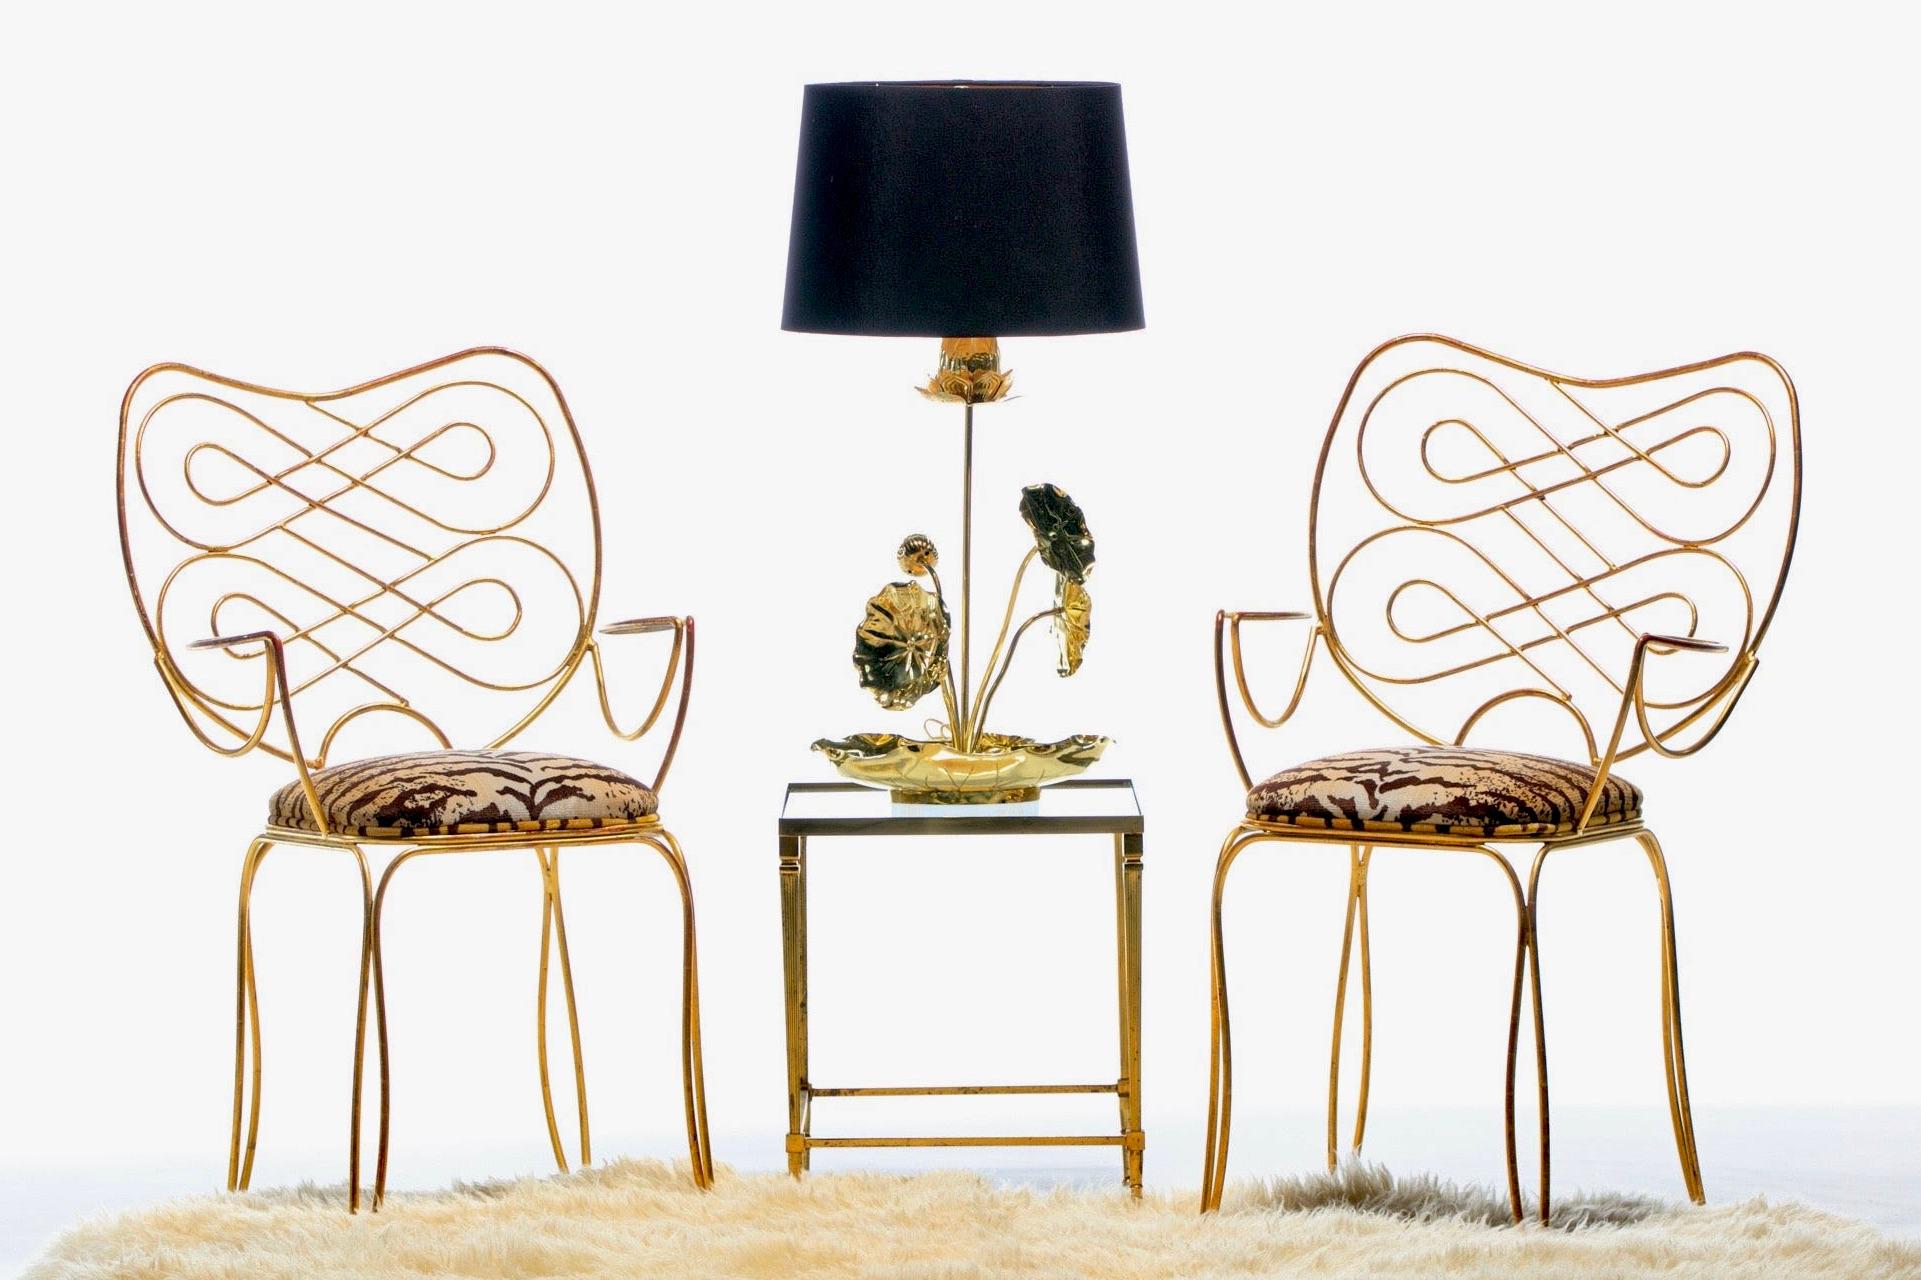 Sculptural brass lotus flower lamp by Feldman Lighting Company often described as in the style of Tommi Parzinger. When originally sold, Feldman Lotus Lamps were customized to the buyer's taste - one could select the number of branches and